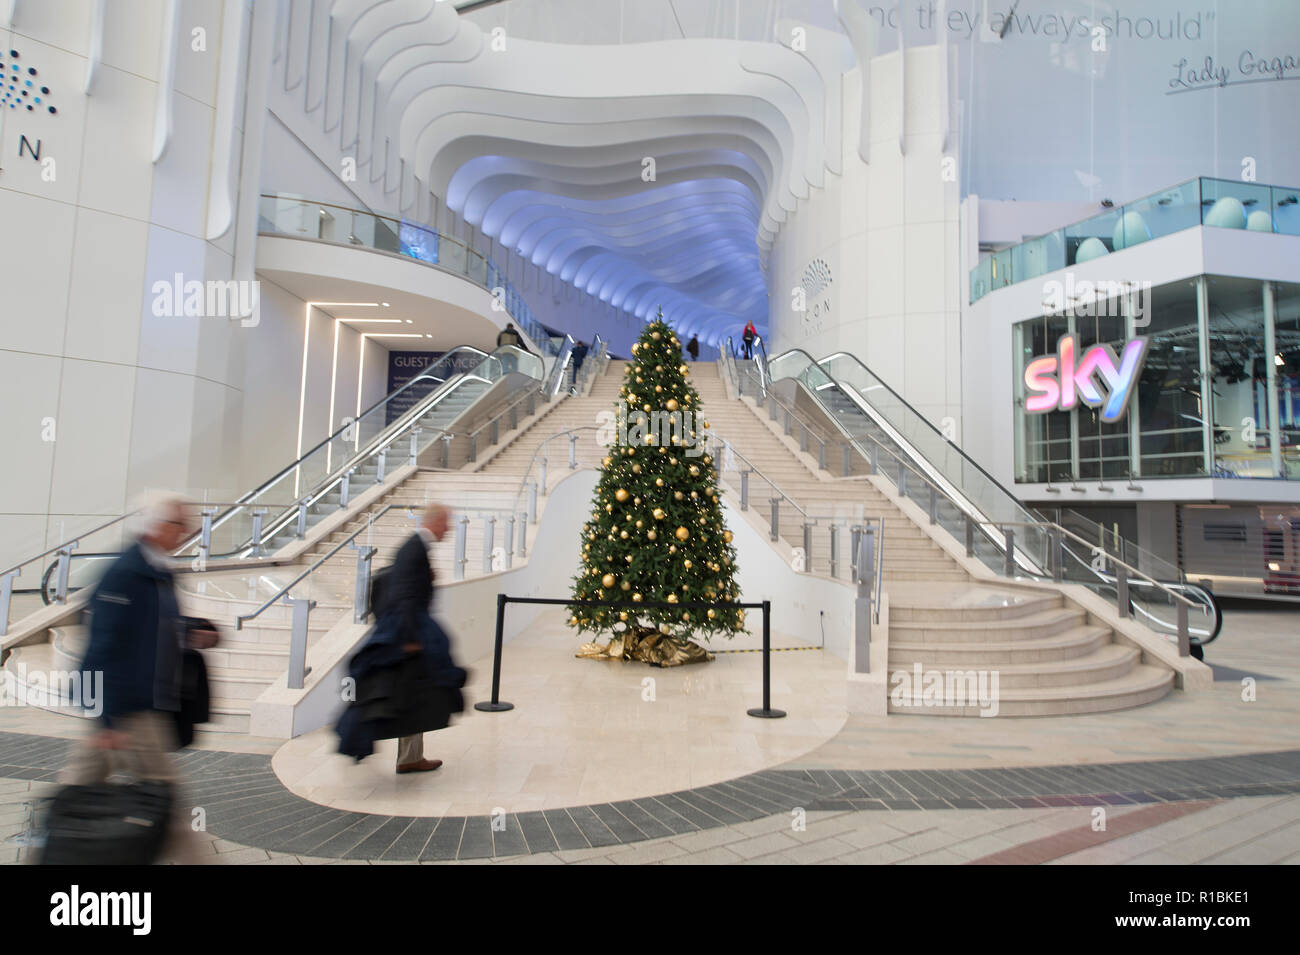 O2, London, UK. 11 November, 2018. Christmas tree at the entrance to the new Icon Outlet shopping centre in the O2. Credit: Malcolm Park/Alamy Live News. Stock Photo